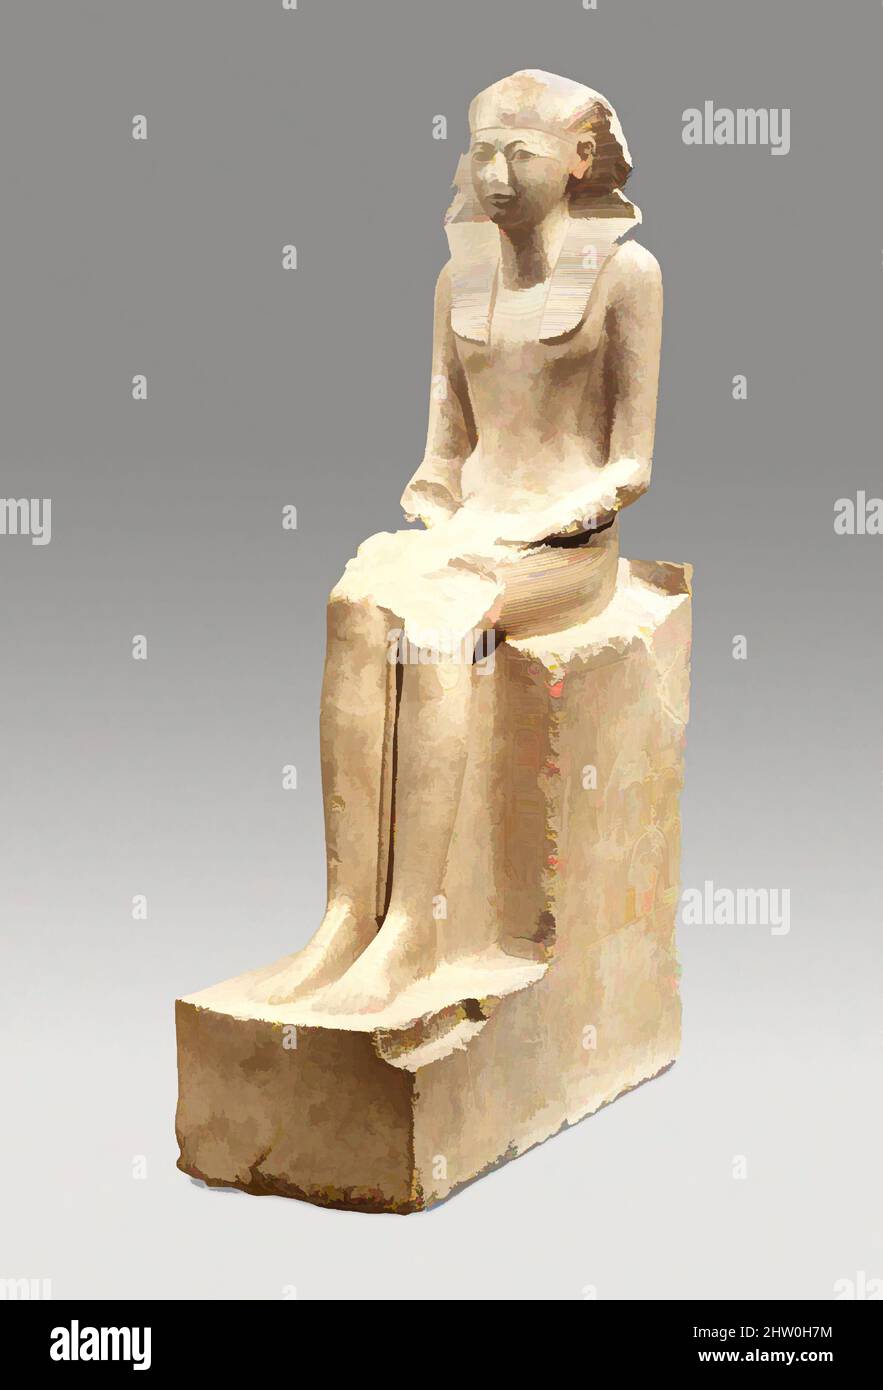 Art inspired by Seated Statue of Hatshepsut, New Kingdom, Dynasty 18, ca. 1479–1458 B.C., From Egypt, Upper Egypt, Thebes, Deir el-Bahri & el- Asasif, Senenmut Quarry, 1926–28/Lepsius 1843–45, Indurated limestone, paint, H. 195 cm (76 3/4 in.); W. 49 cm (19 5/16 in.); D. 114 cm (44 7/8, Classic works modernized by Artotop with a splash of modernity. Shapes, color and value, eye-catching visual impact on art. Emotions through freedom of artworks in a contemporary way. A timeless message pursuing a wildly creative new direction. Artists turning to the digital medium and creating the Artotop NFT Stock Photo